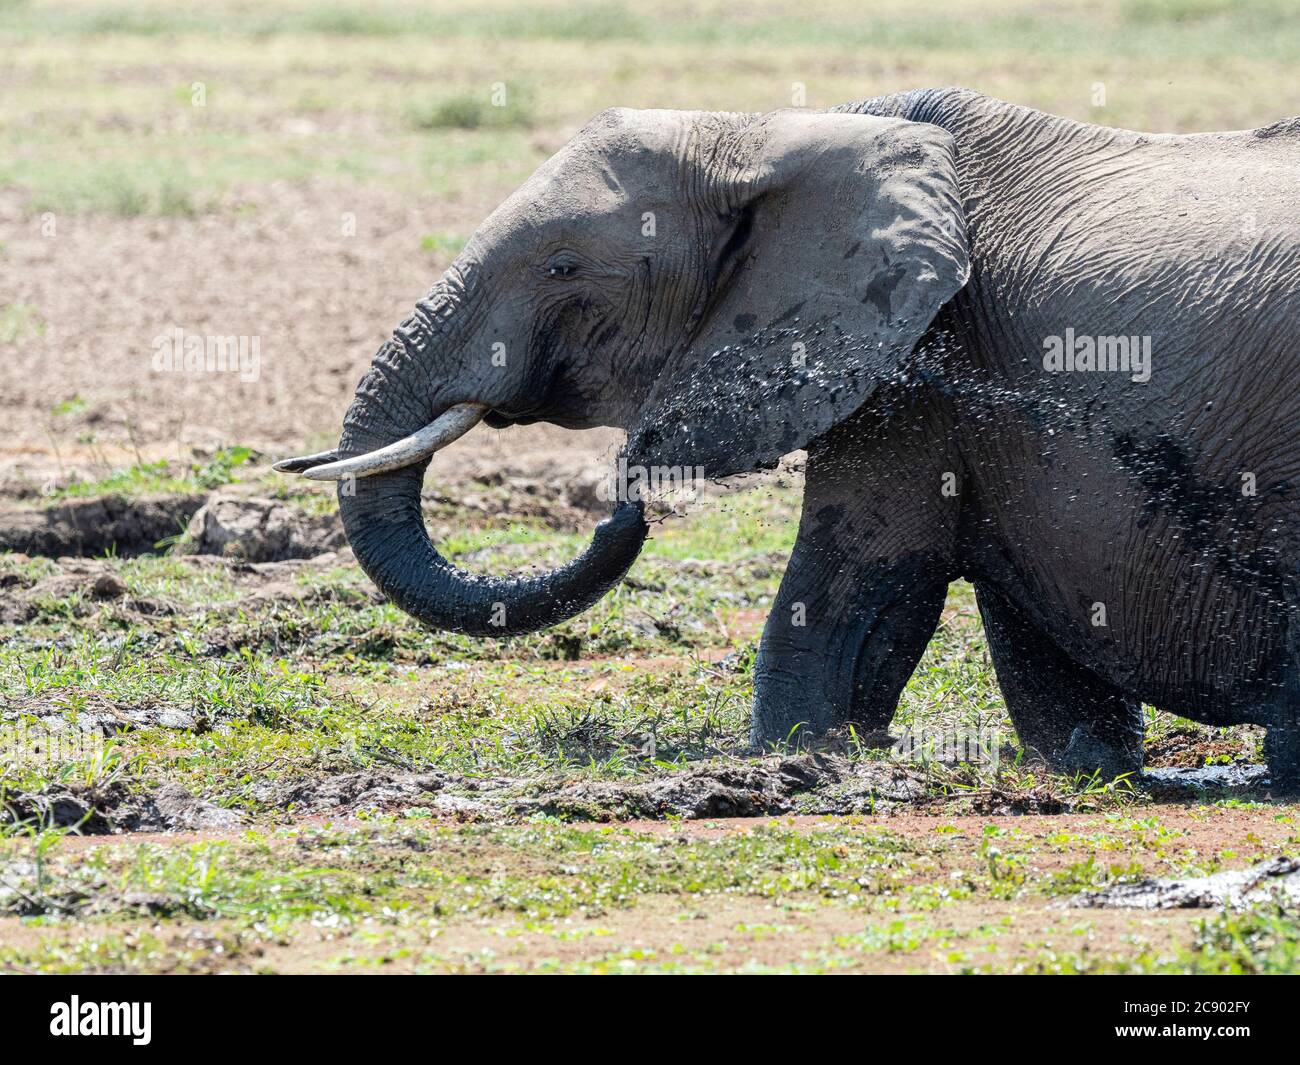 A young African bush elephant, Loxodonta africana, in South Luangwa National Park, Zambia. Stock Photo